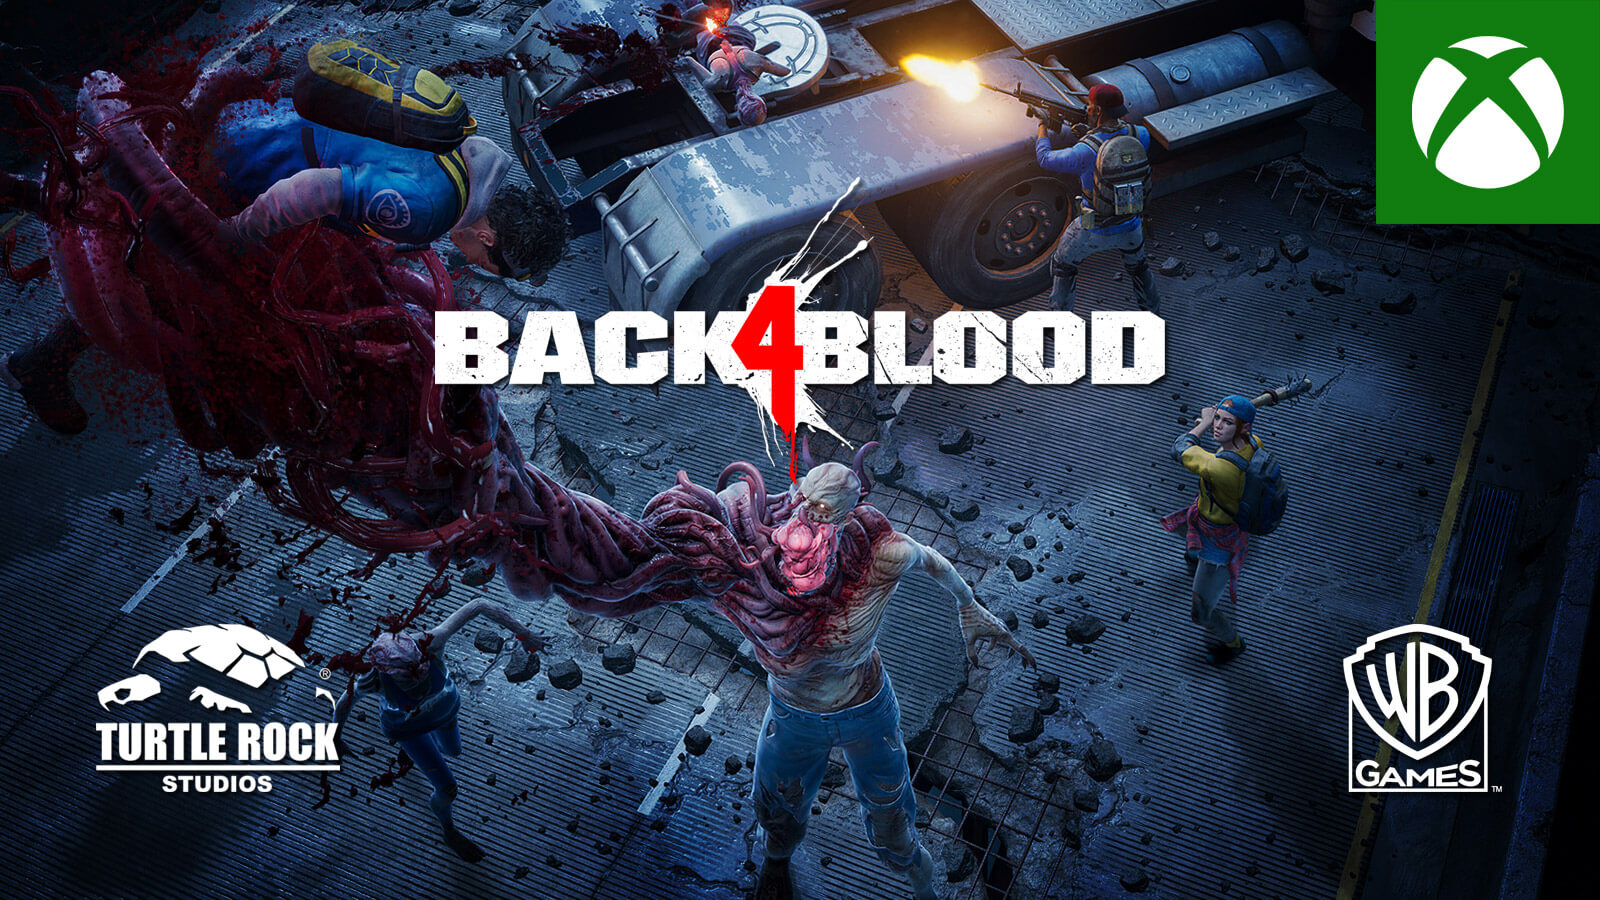 Back 4 Blood - The Co-op Mode 